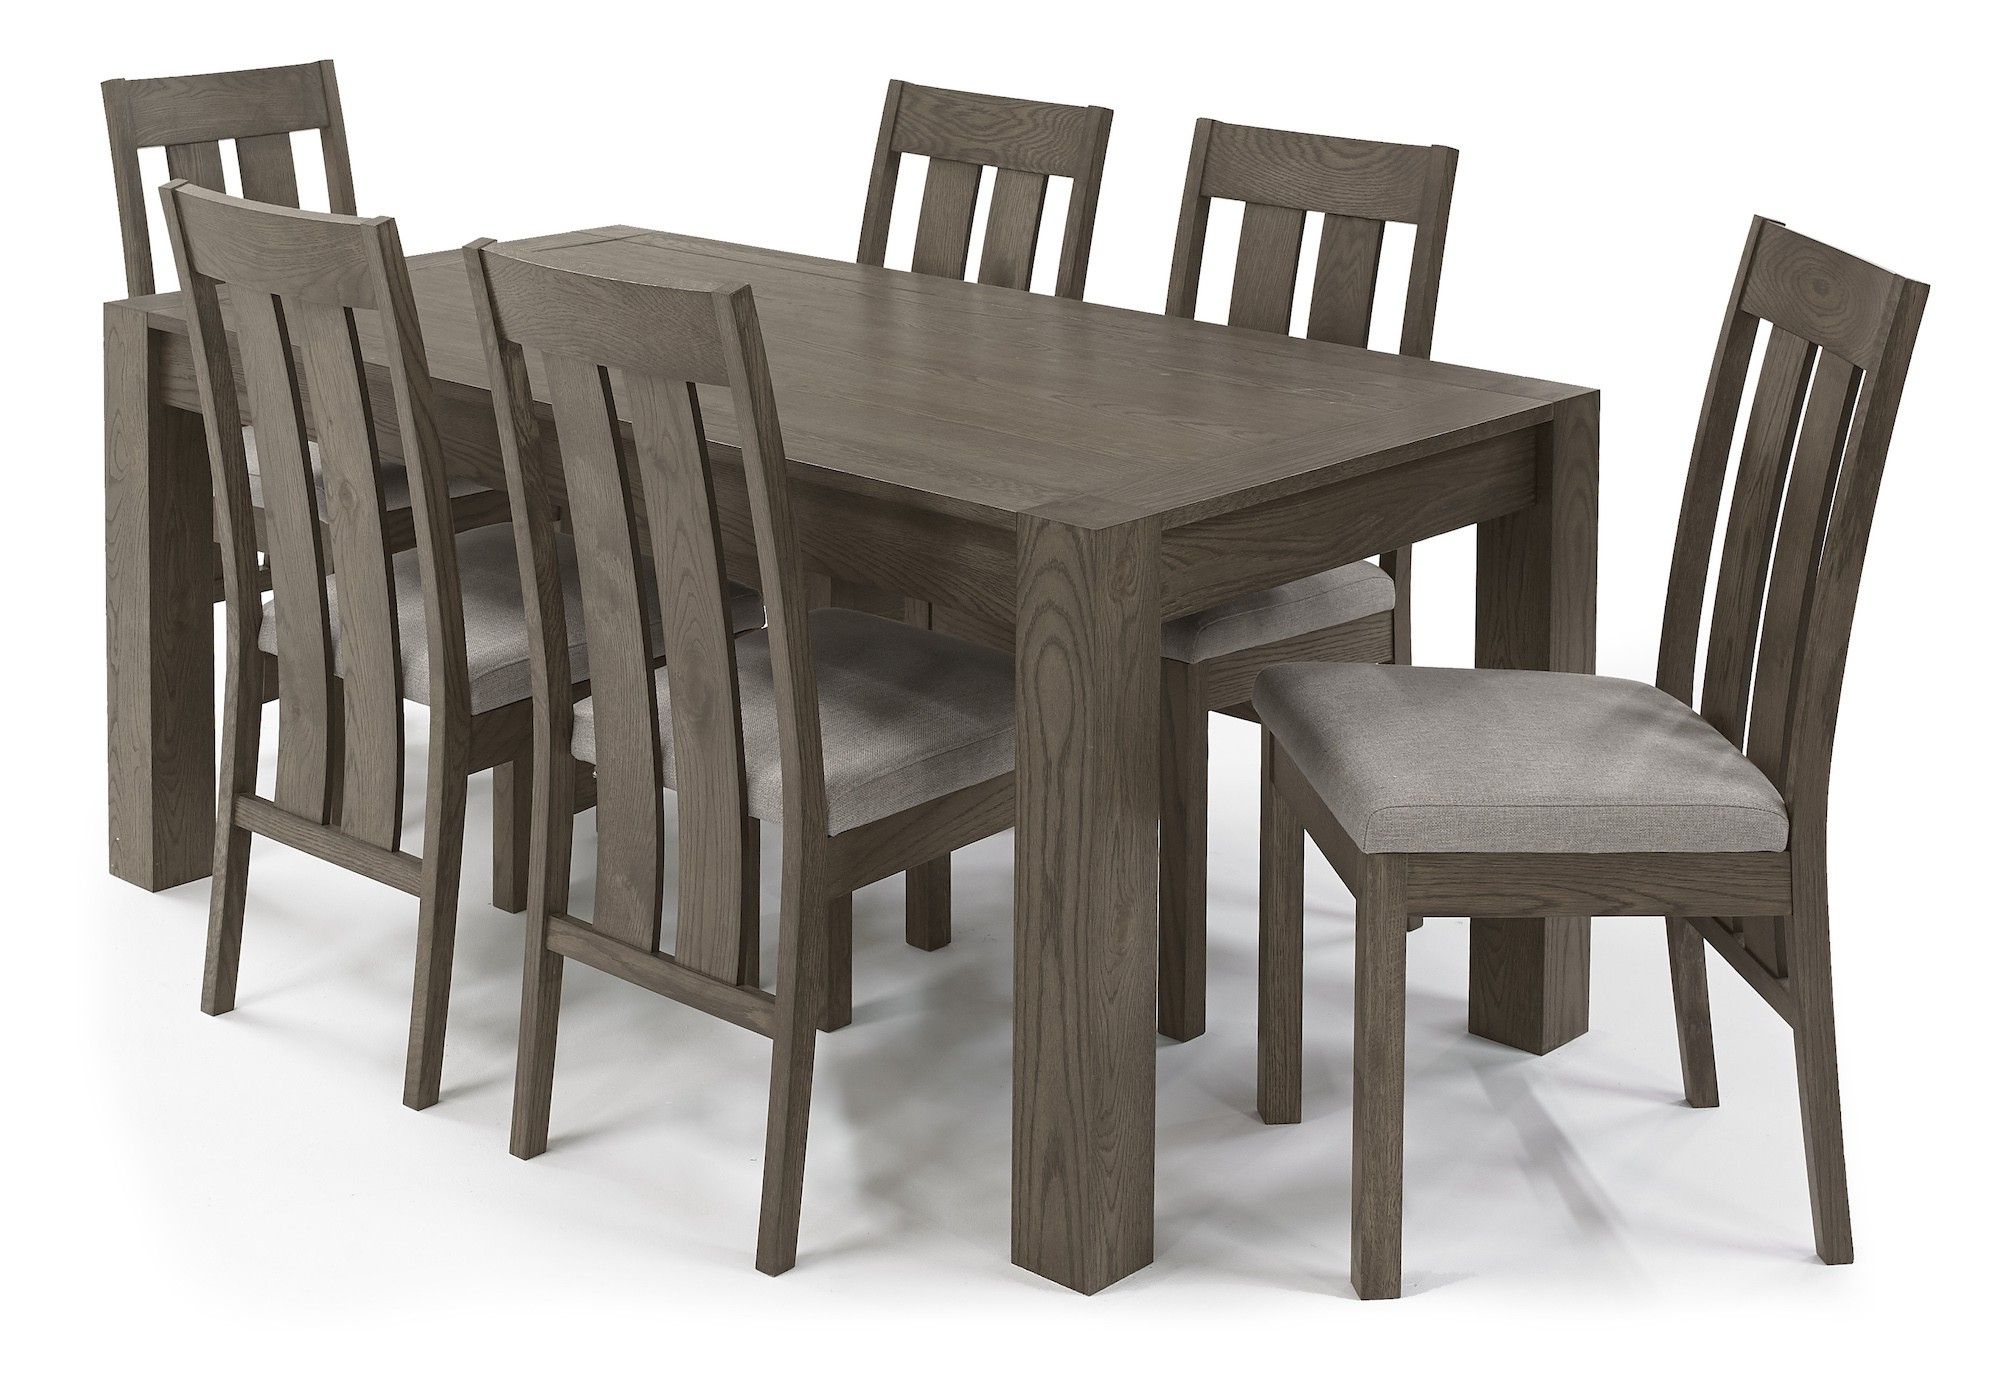 Turin Dark Oak Dining Table Medium 4 6 Seater End Extension Dining Table Inside Trendy Medium Dining Tables (View 15 of 25)